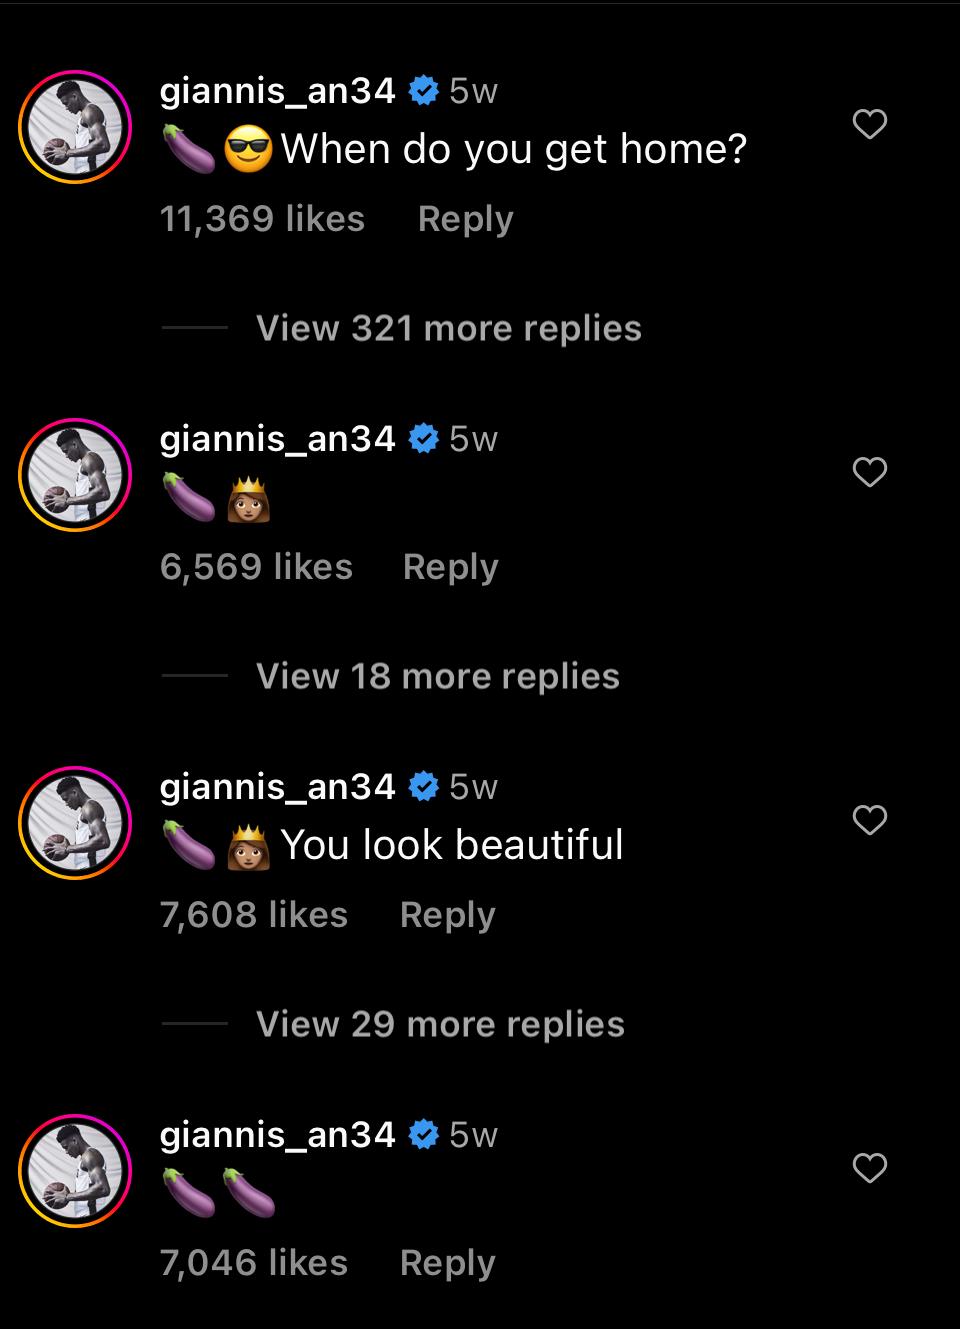 Giannis comments on his girlfriend's IG post